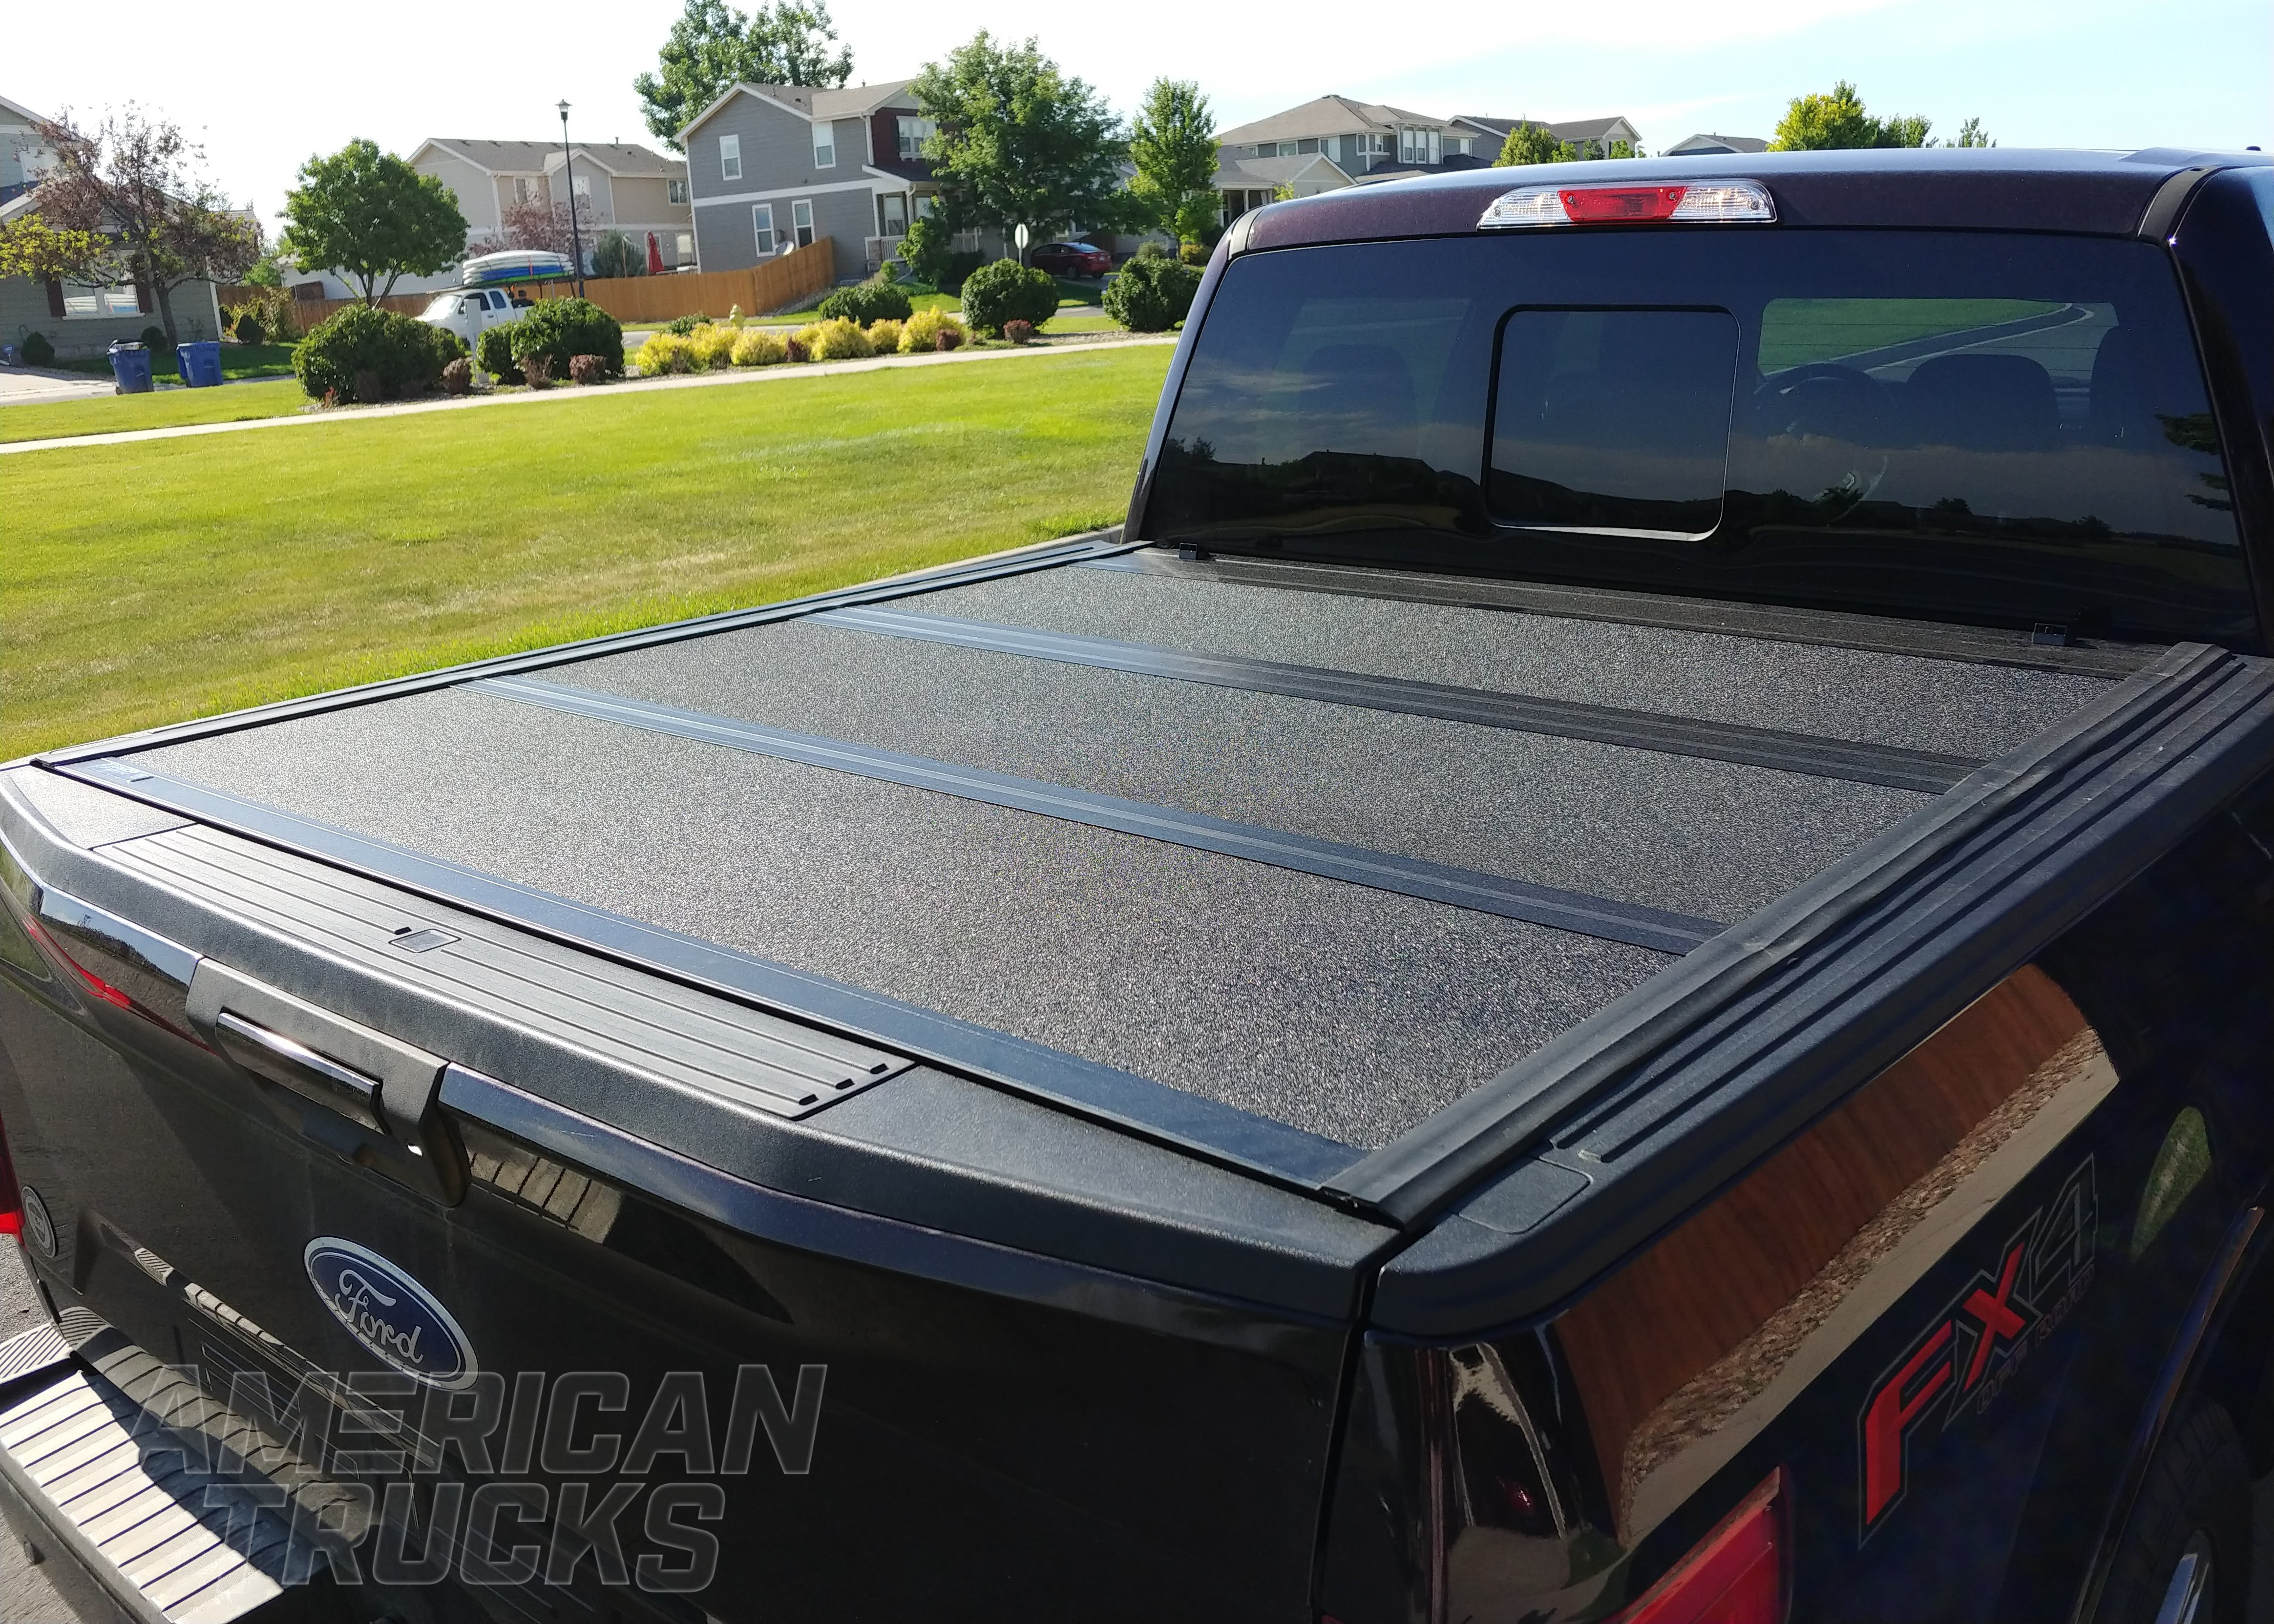 2018 5.0L V8 F150 with a Tri-Fold Bed Cover